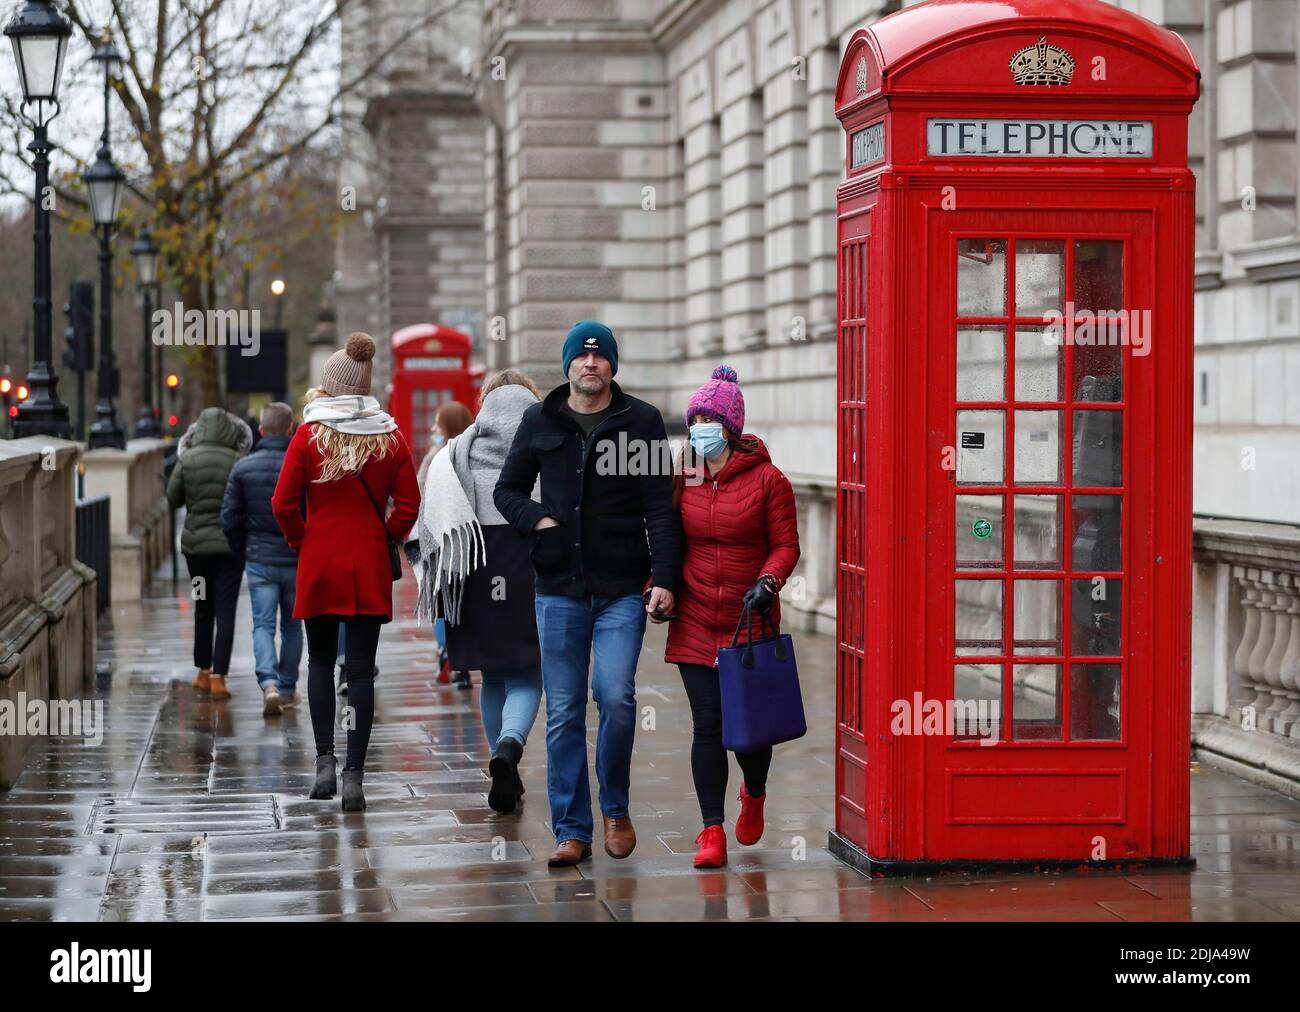 London, Britain. 13th Dec, 2020. People wearing face masks walk past a red telephone box in central London, Britain, on Dec. 13, 2020. Britons who have been in contact with someone who has tested positive for coronavirus will have to self-isolate for 10 days instead of 14, Britain's chief medical officers announced Friday. The new measure, coming into effect from Monday, also applies to those required to quarantine after returning from countries which are not on Britain's travel corridor list. Credit: Han Yan/Xinhua/Alamy Live News Stock Photo